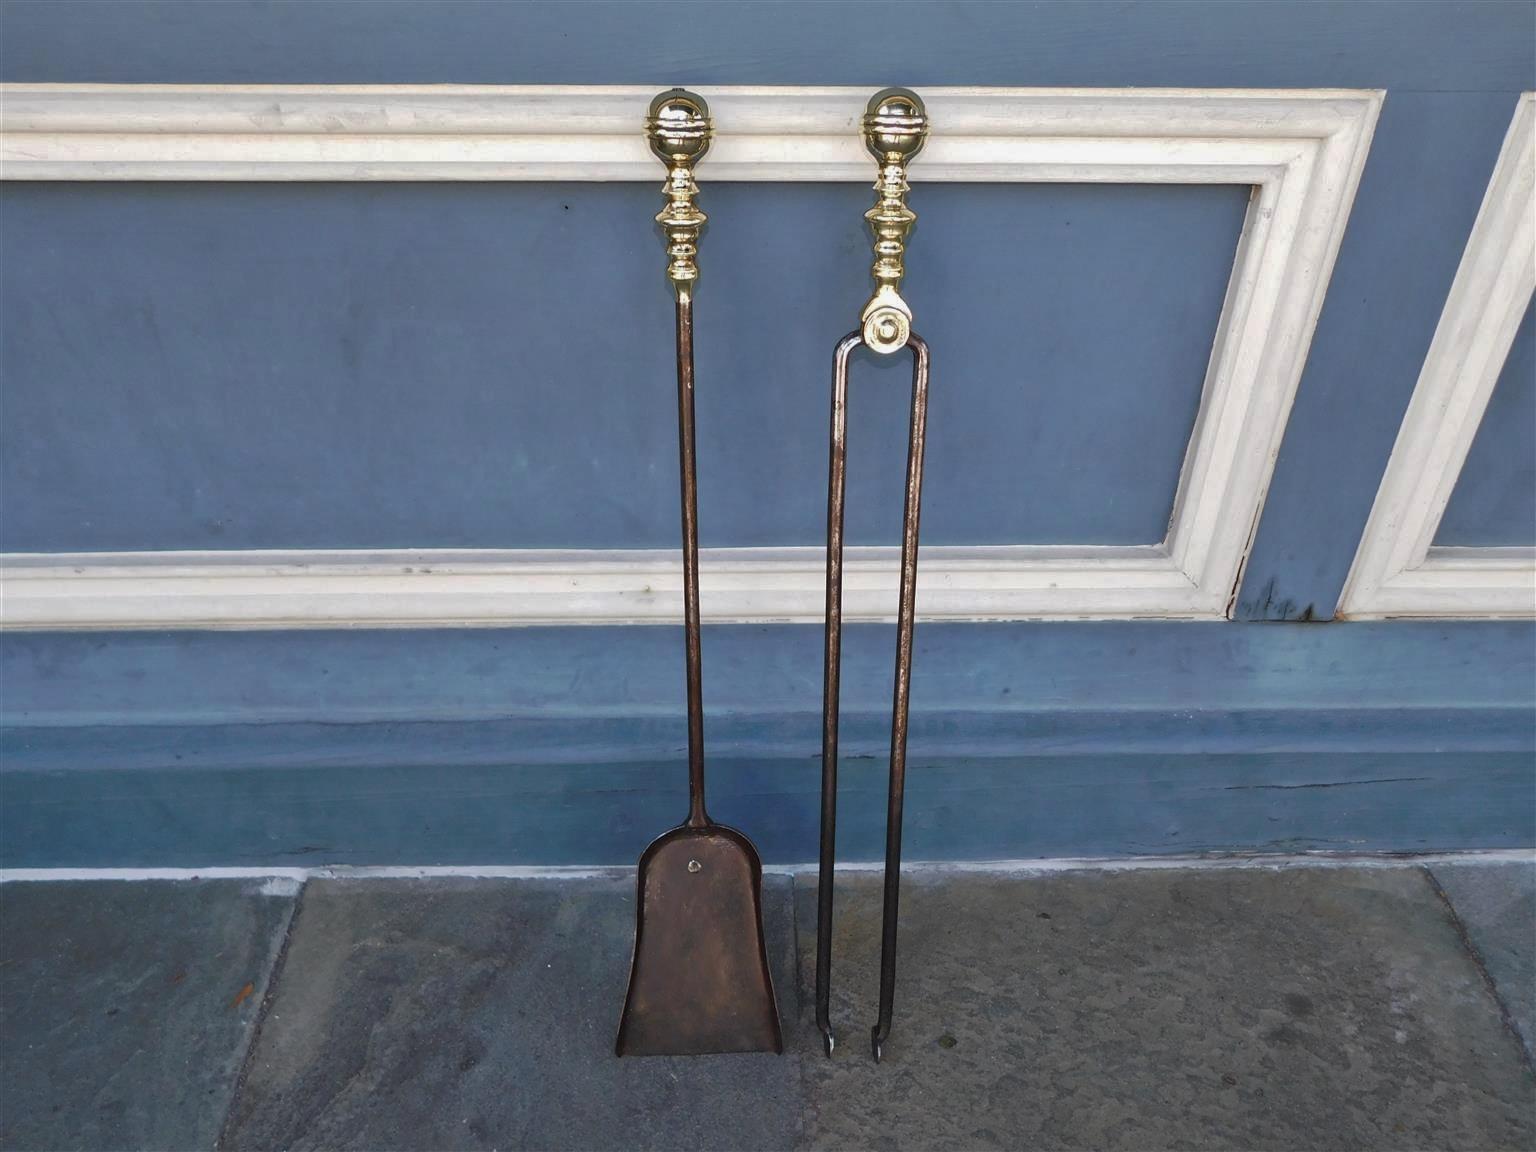 Pair of American Brass and Polished Steel Ball Finial Banded Fire Tools, Early 19th Century Set consist of Tong and Shovel.